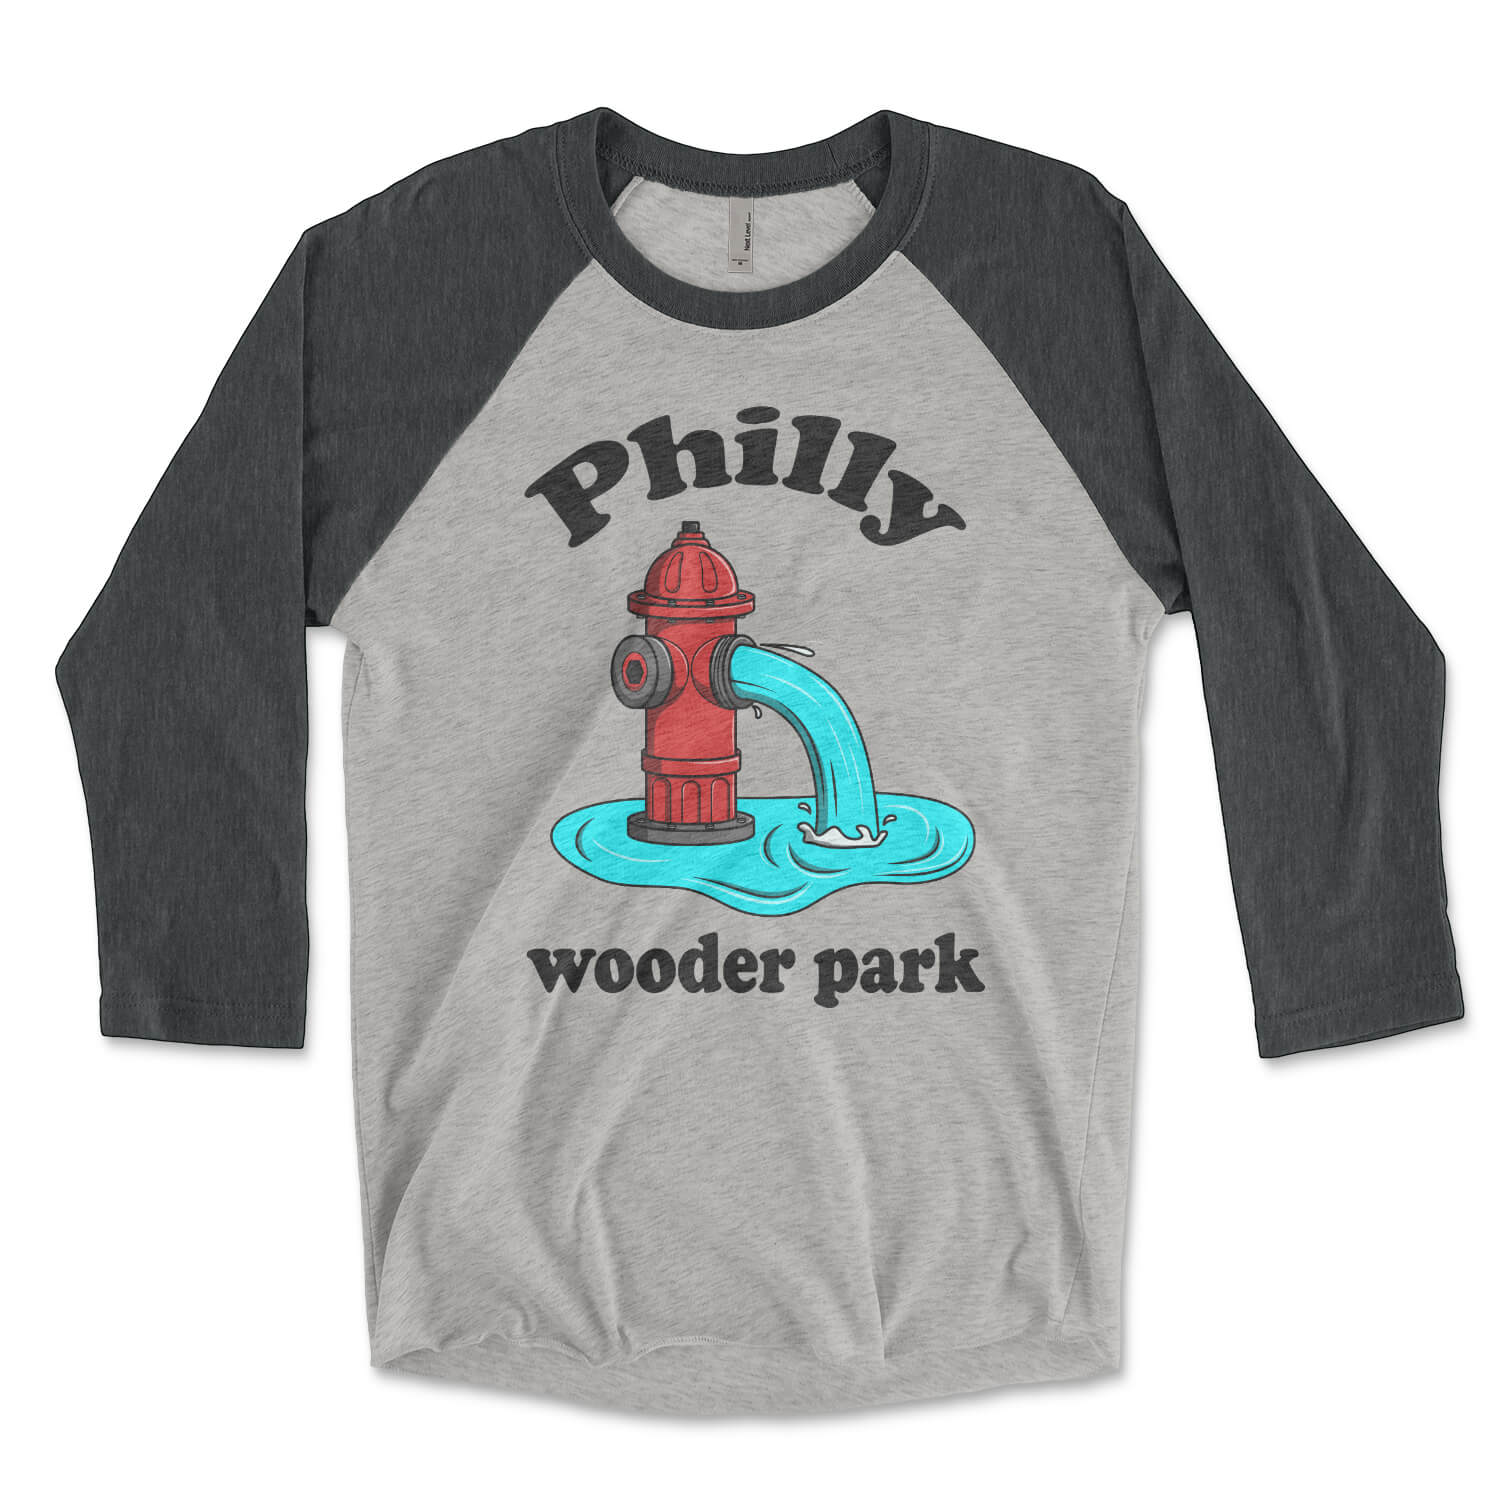 Philadelphia fire hydrant philly wooder park on a grey and black raglan tee shirt from Phillygoat